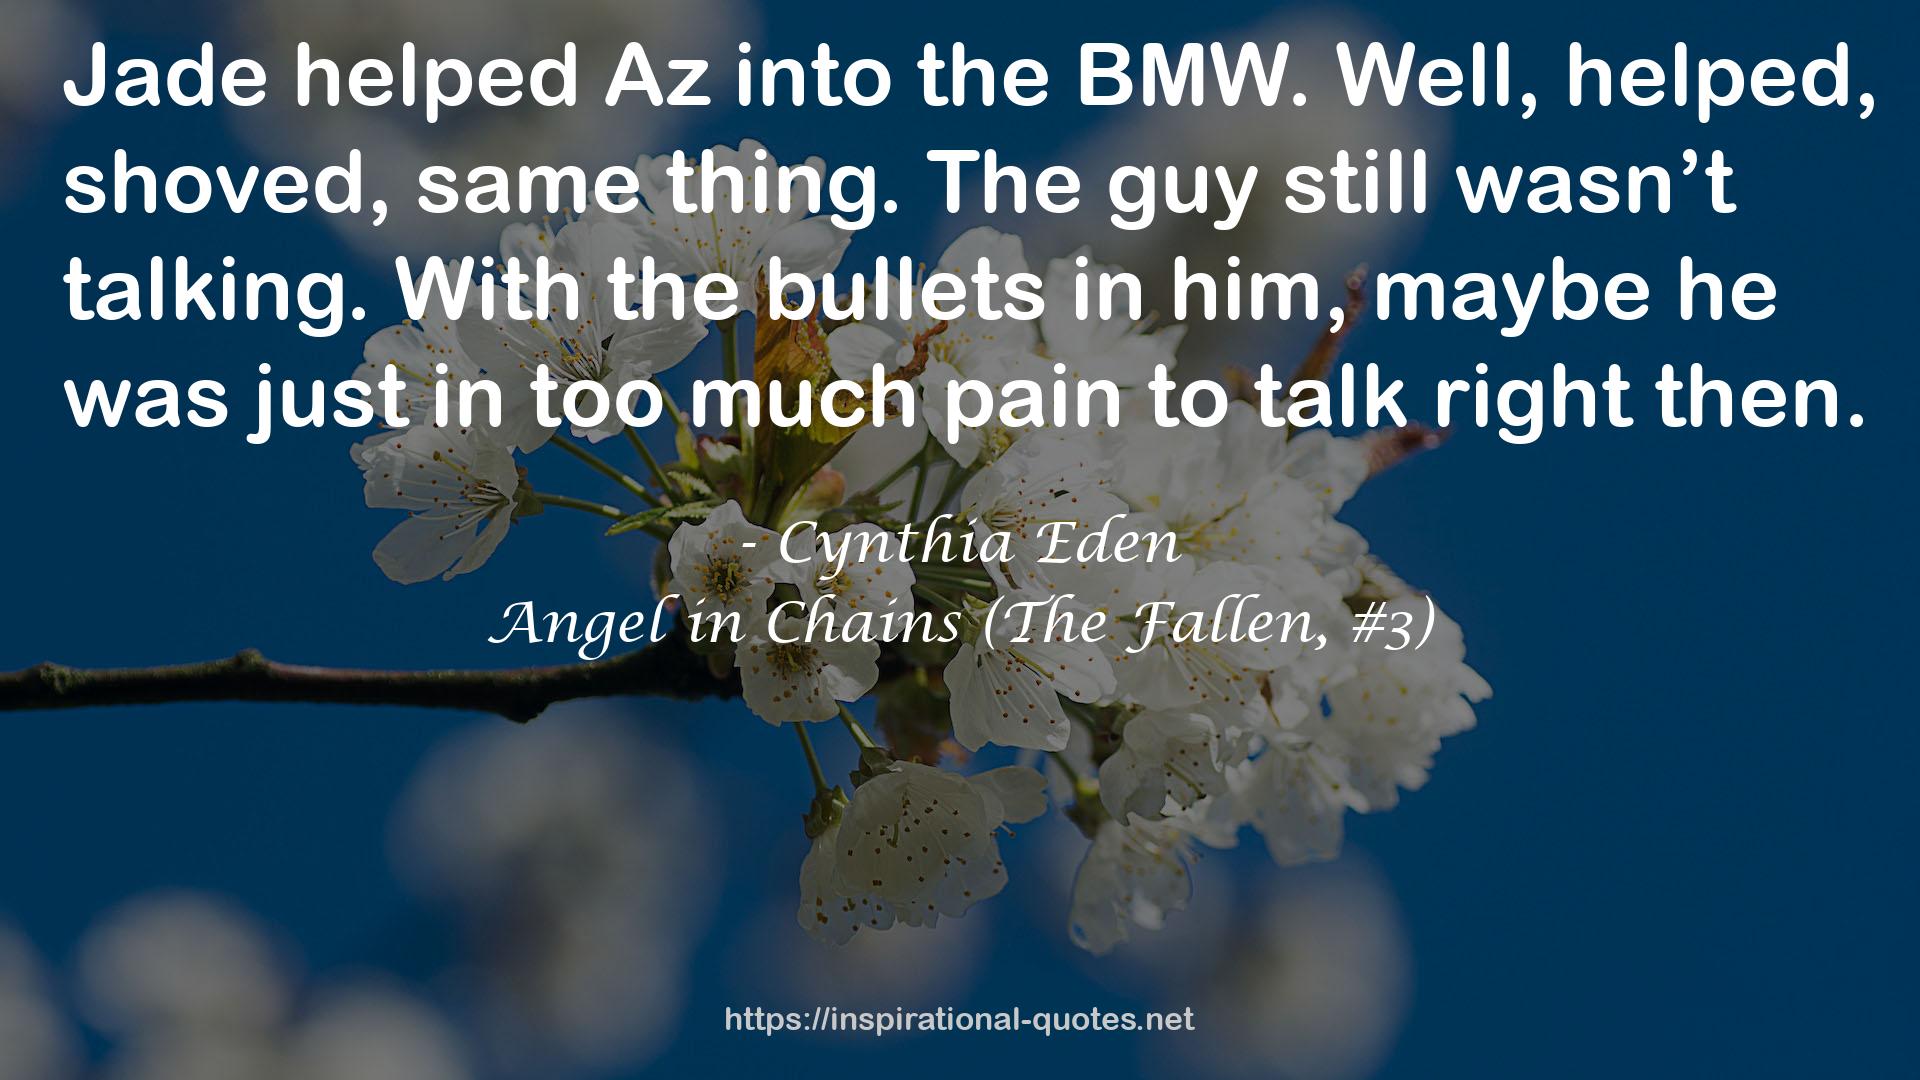 Angel in Chains (The Fallen, #3) QUOTES